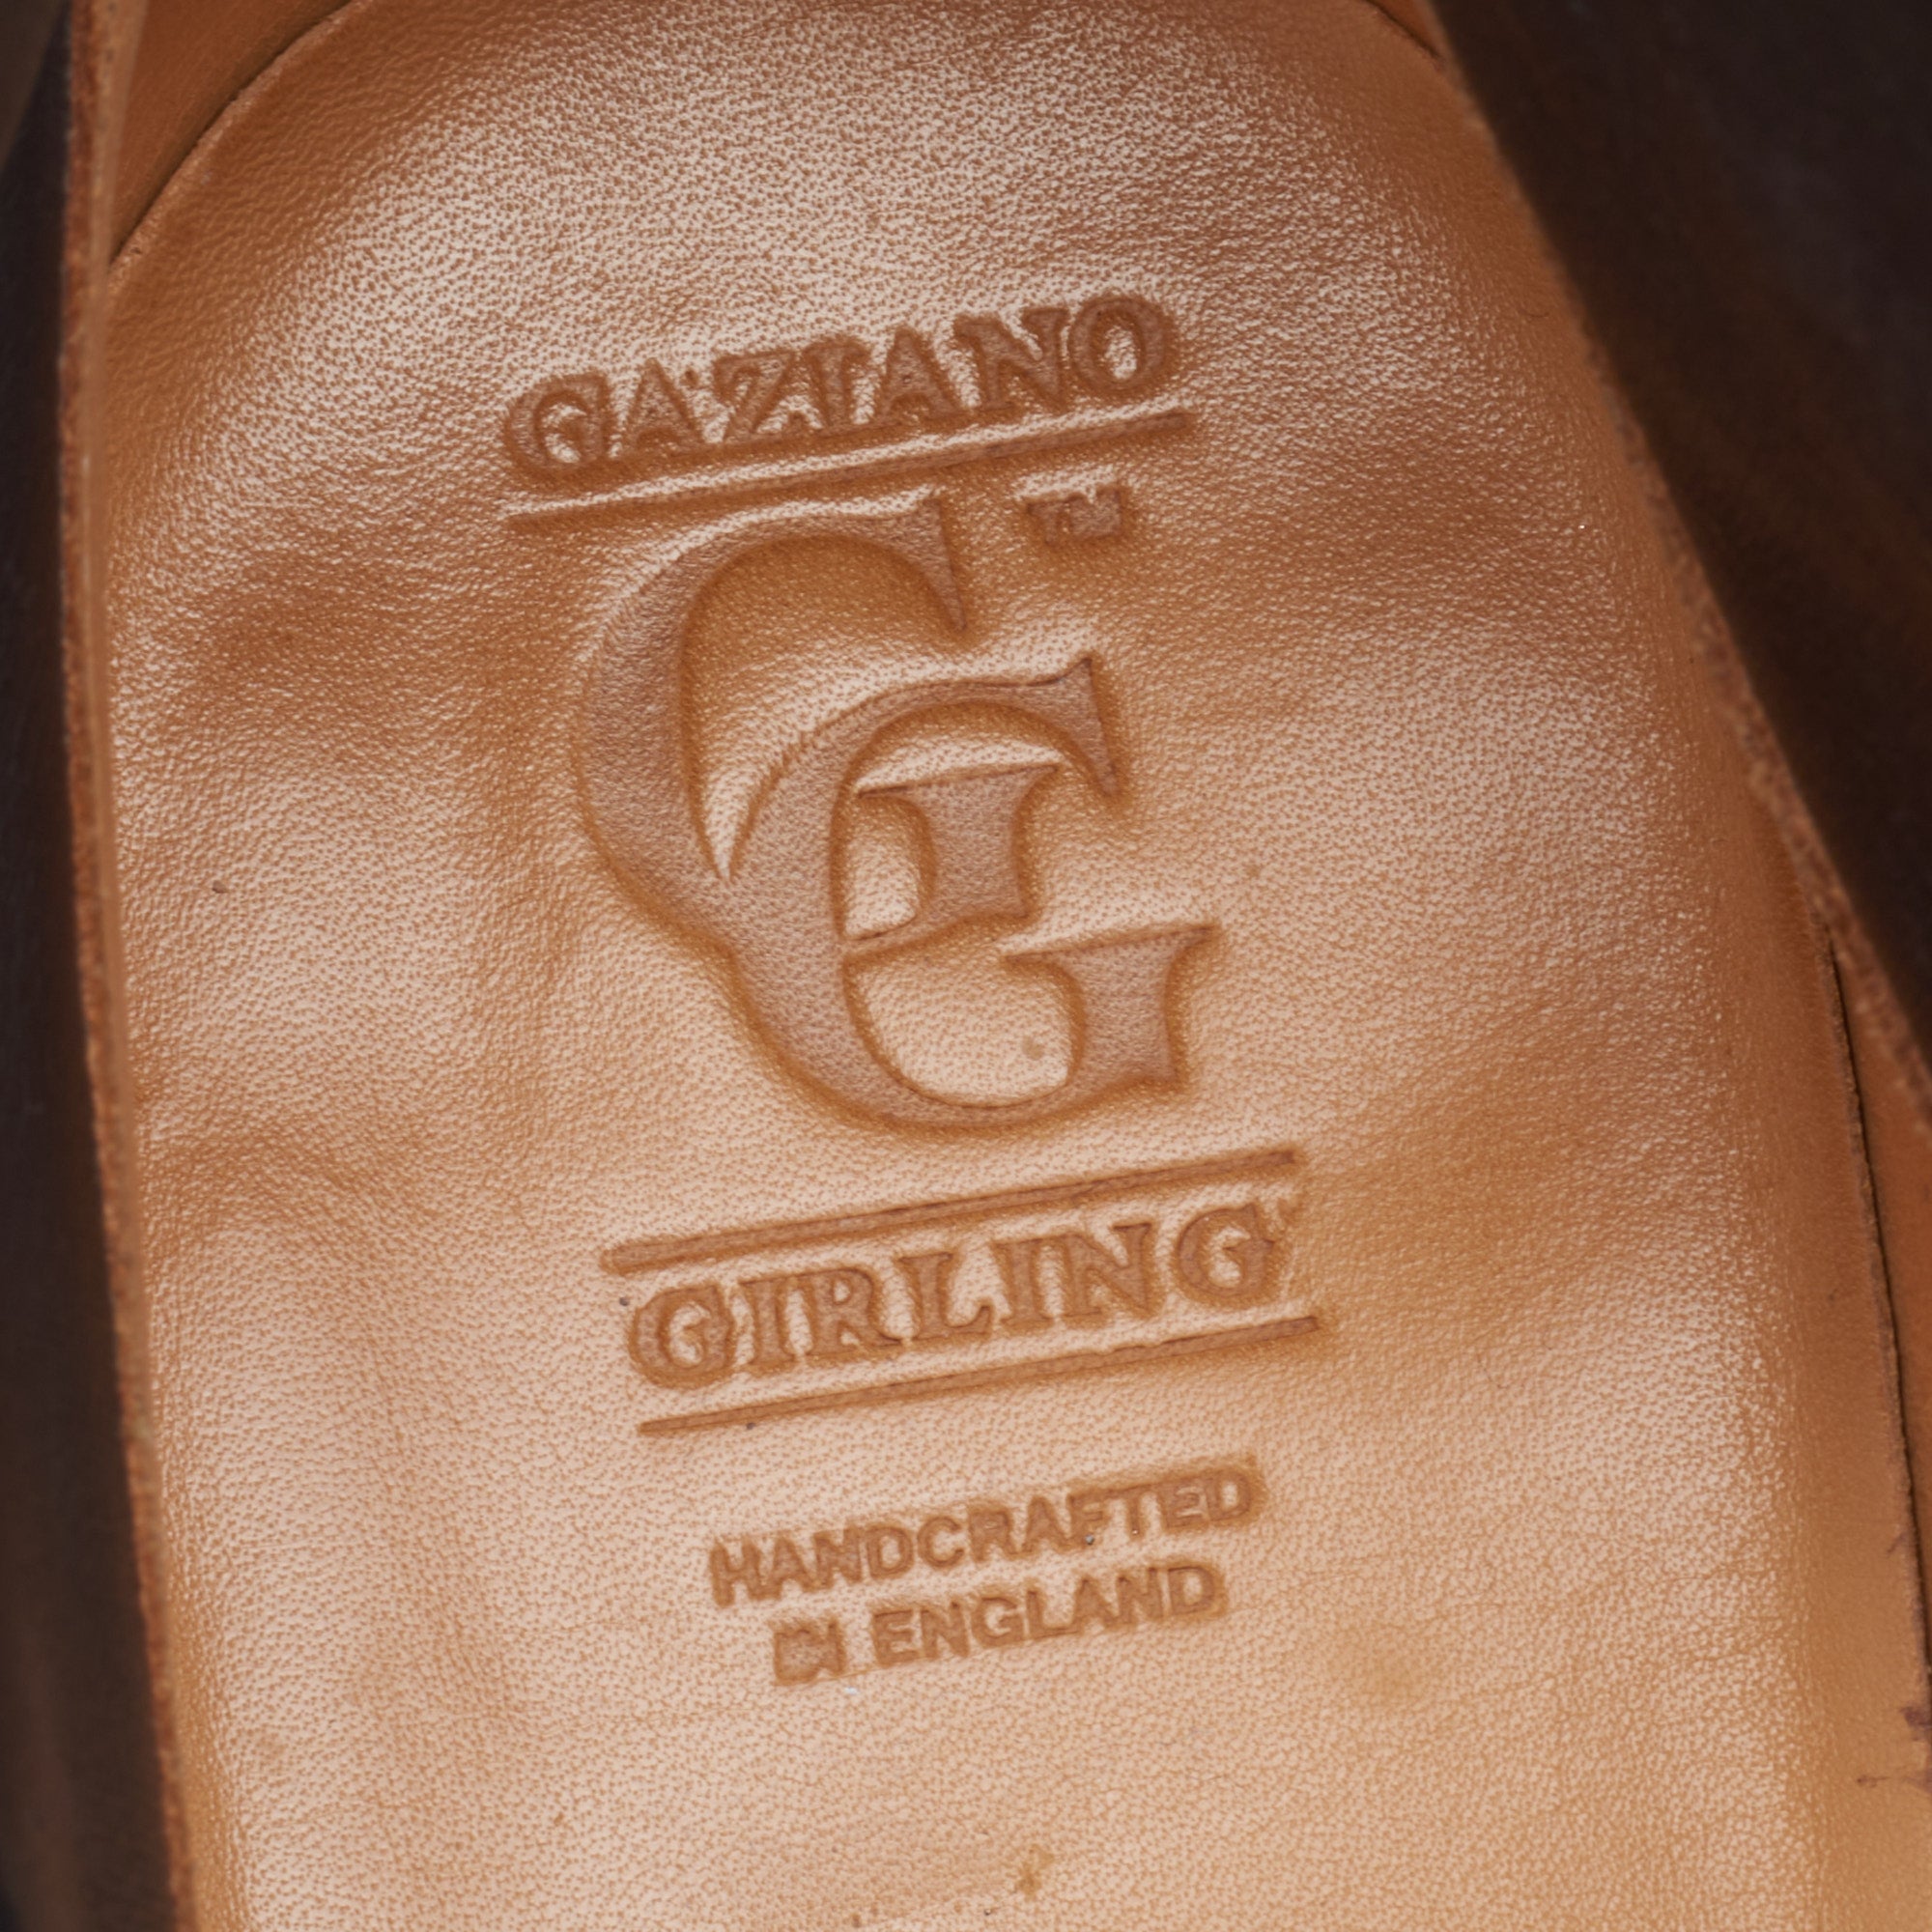 GAZIANO & GIRLING "Arran" Gray Suede Leather Chukka Boots UK 8E US 8.5 Last MH71 GAZIANO & GIRLING